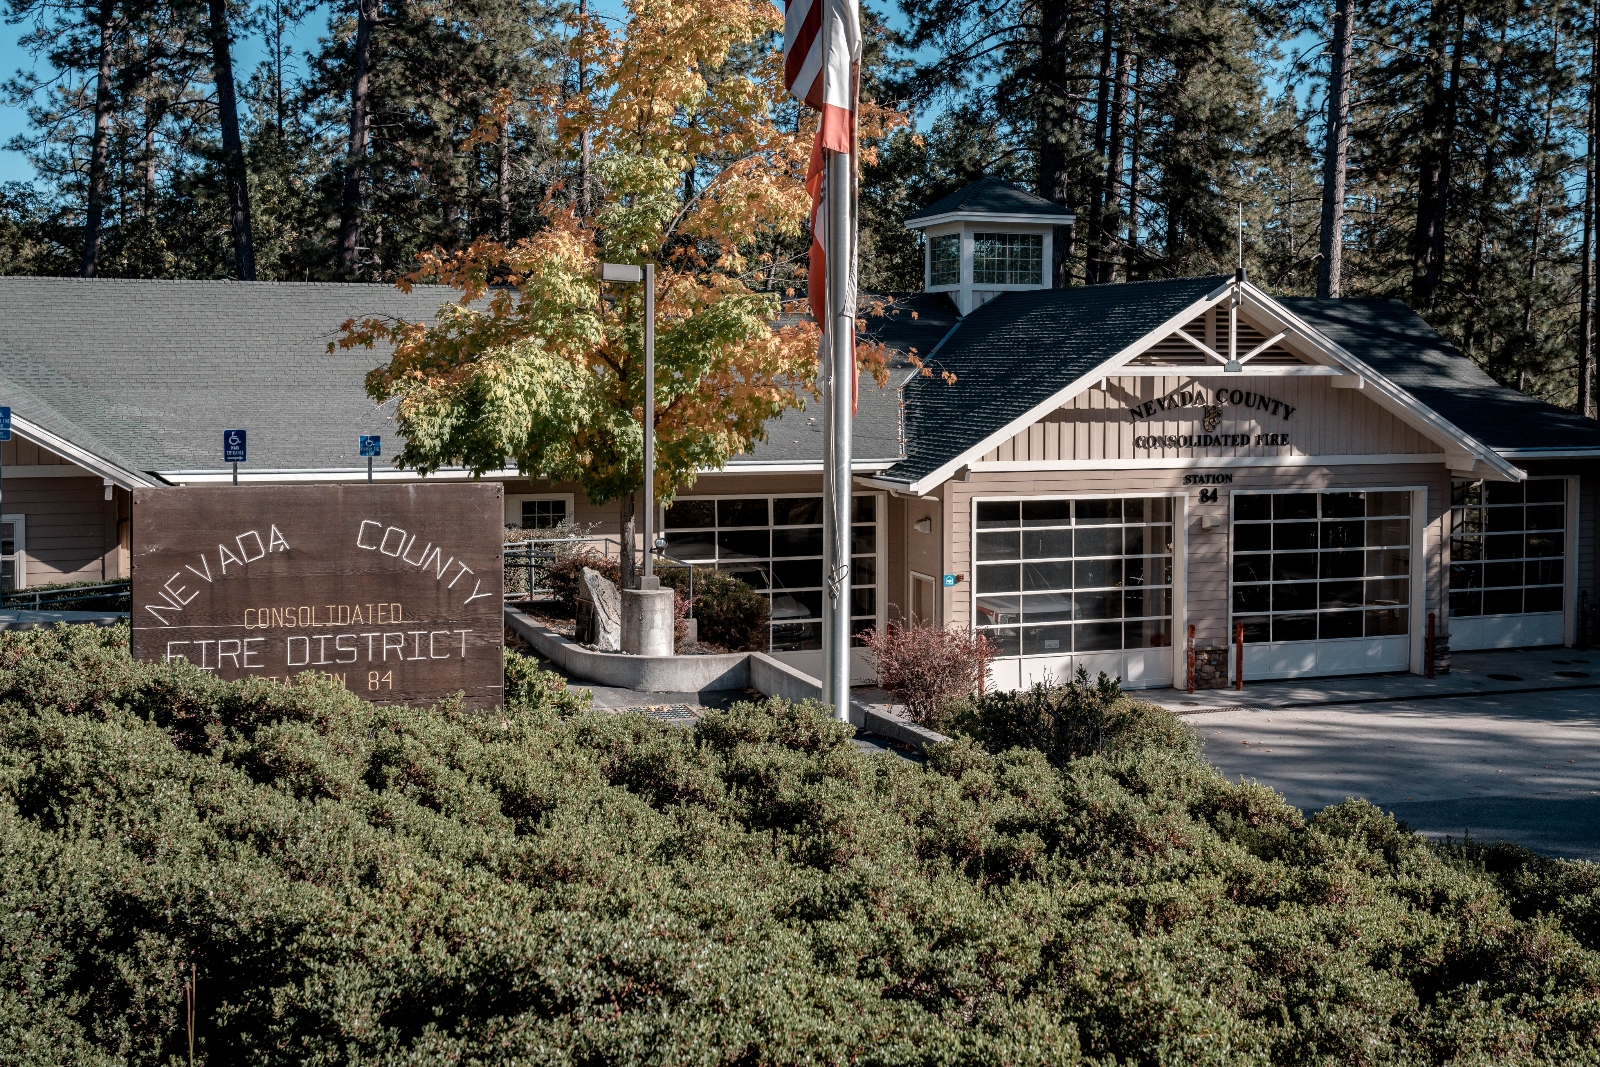 A building next to a tree and shrubs with a sign that says Nevada County Fire District.